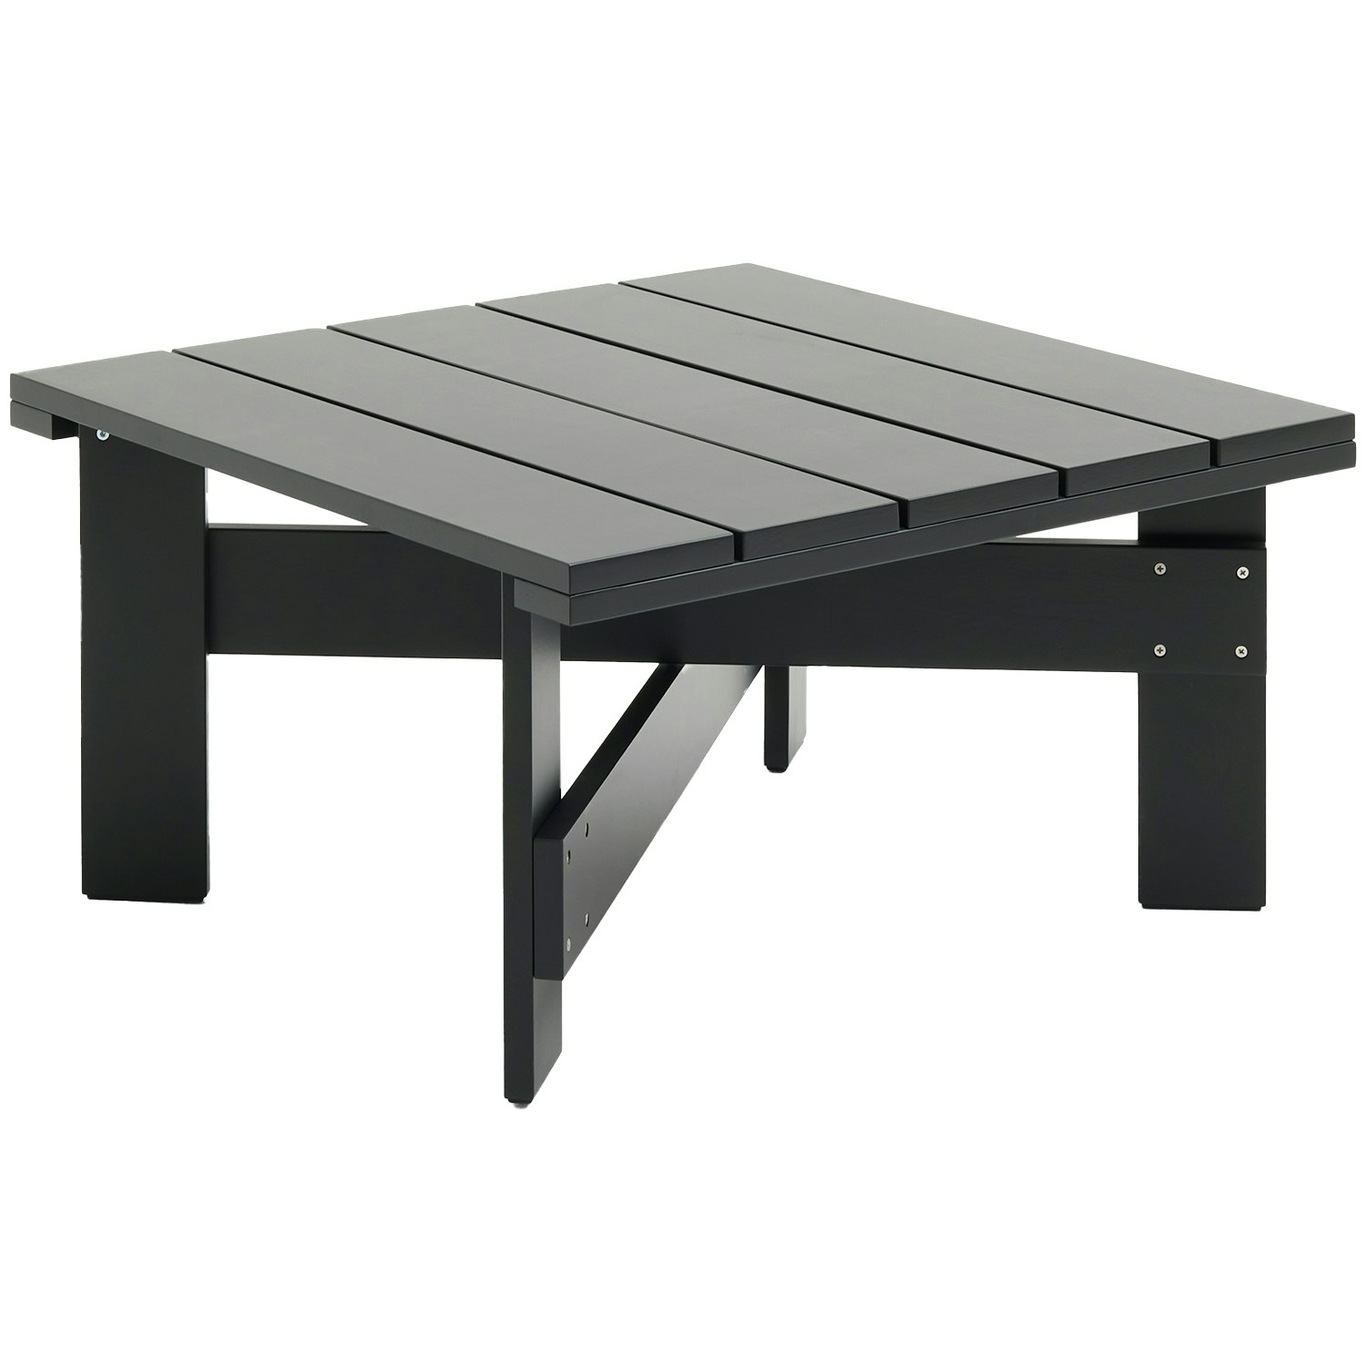 Crate Lounge Table 75x75 cm, Black